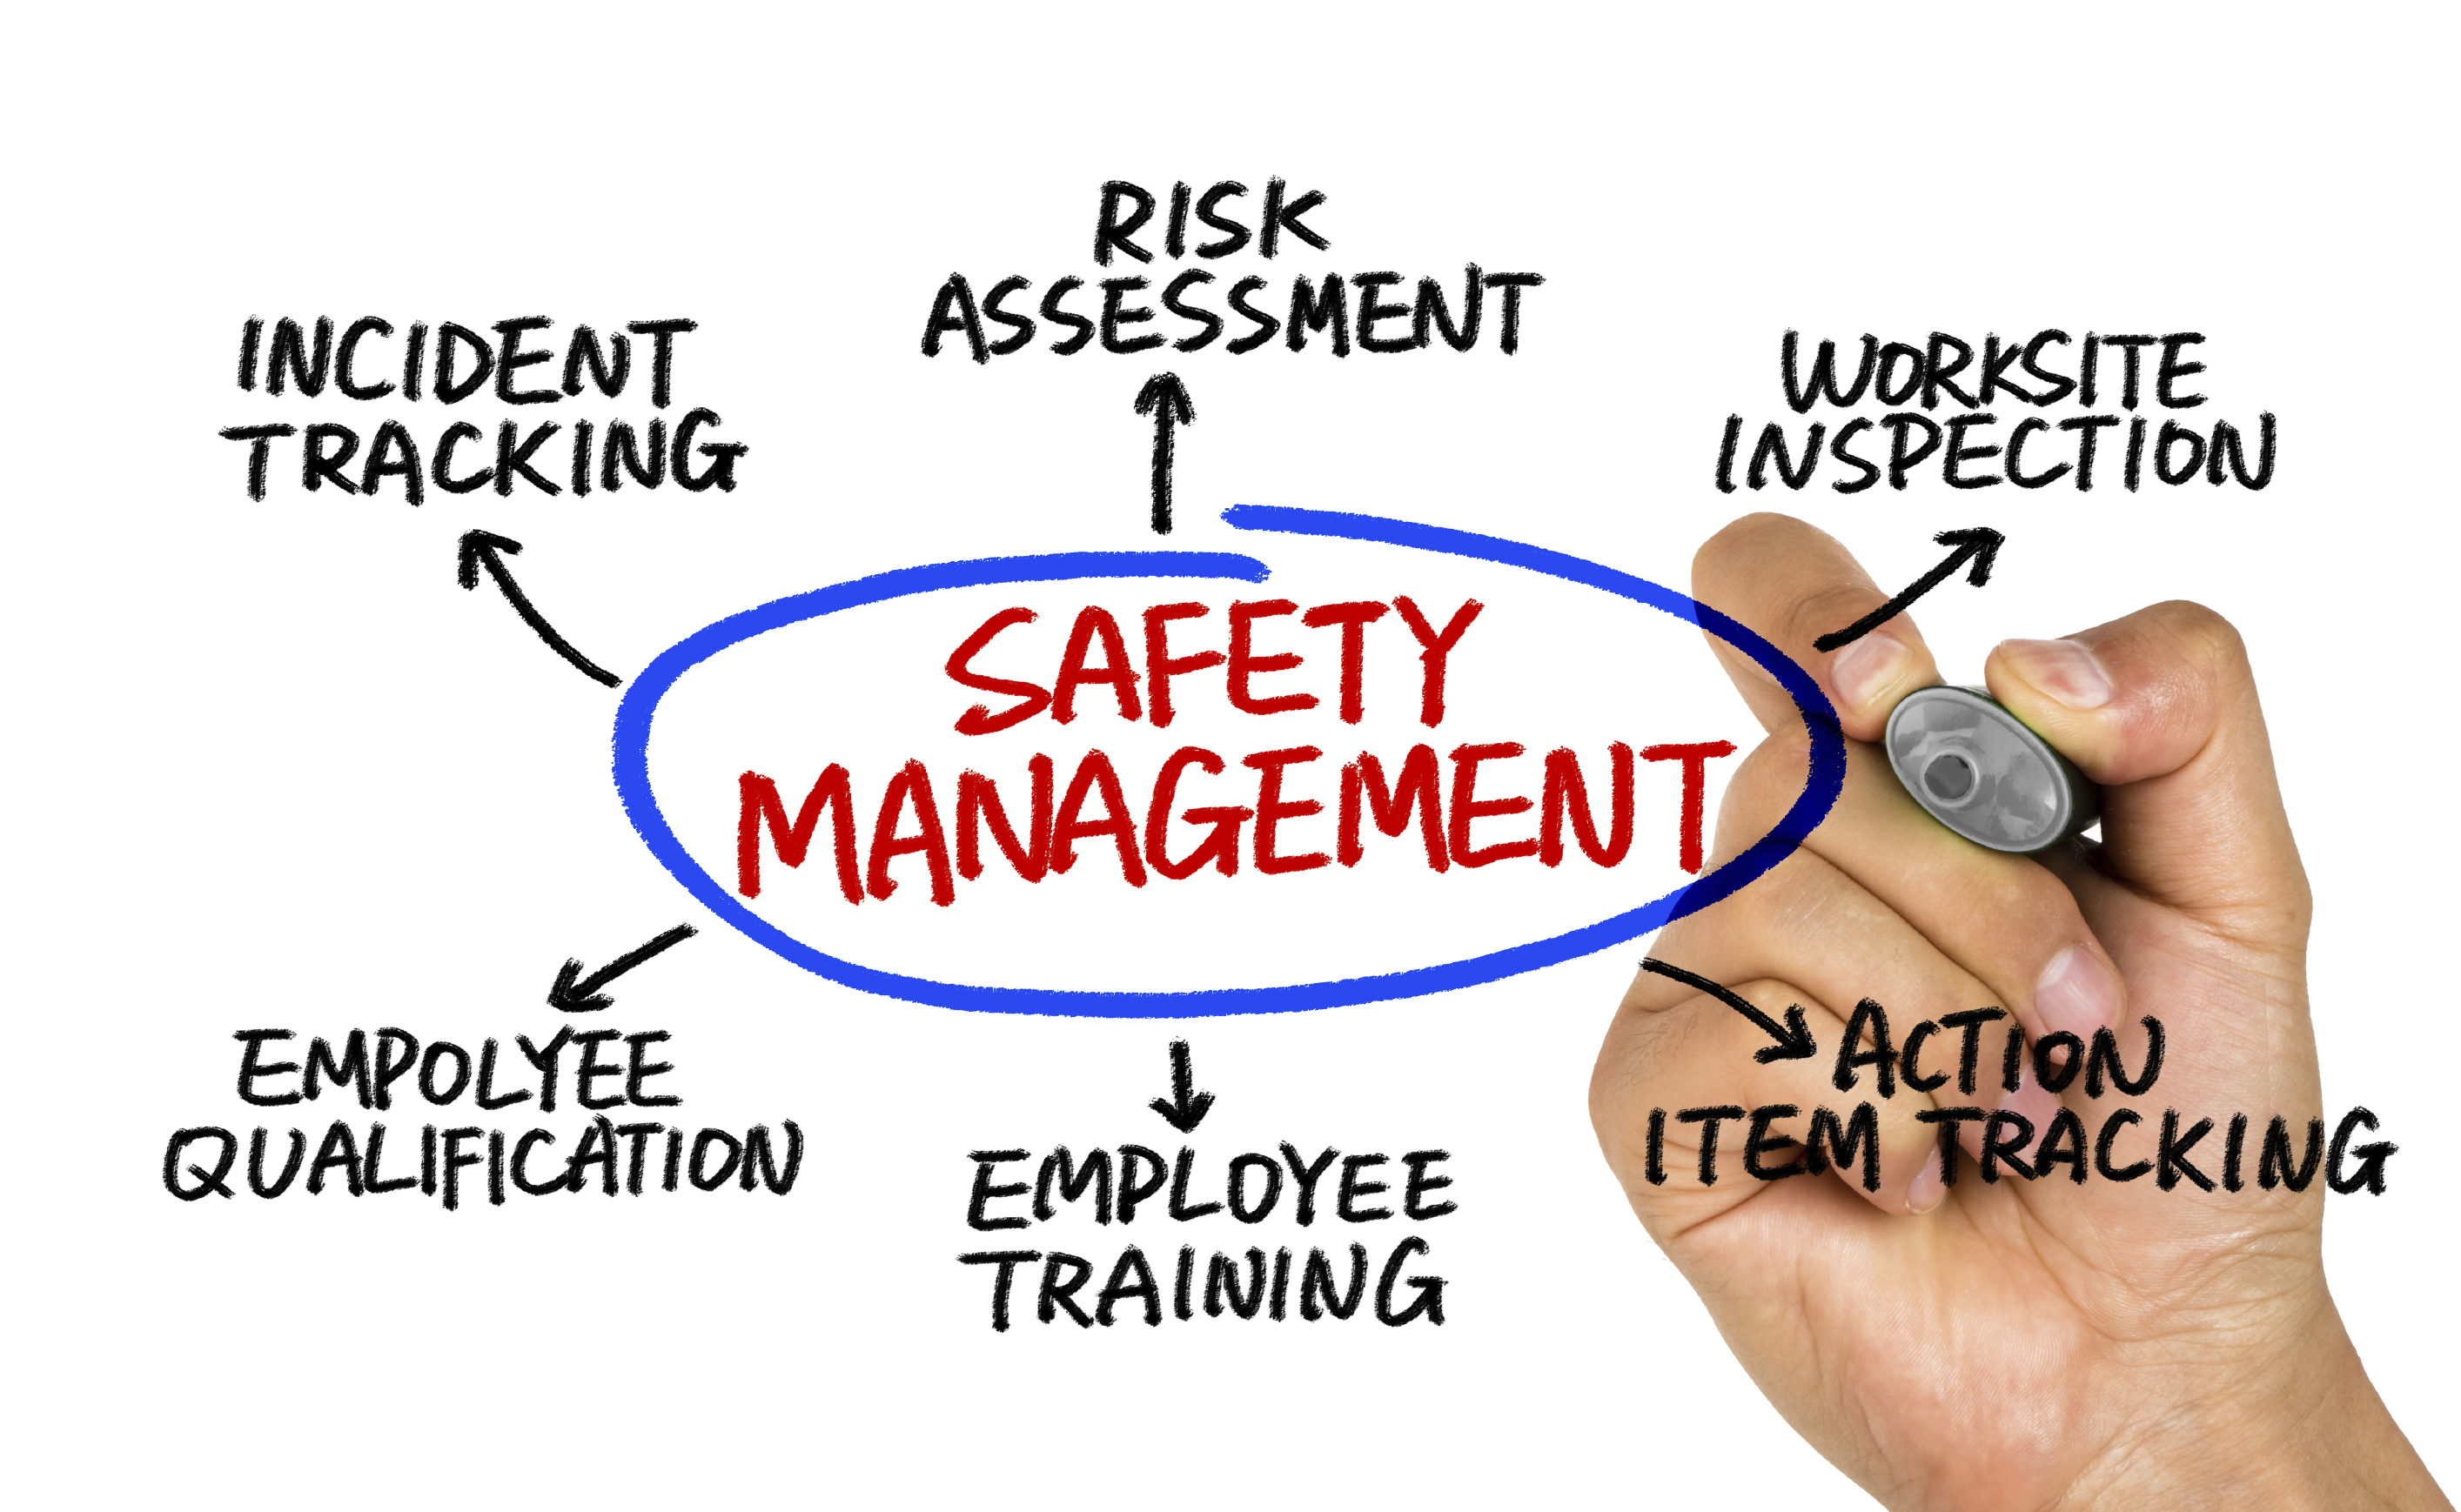 What are Health & Safety Professional Responsibilities?